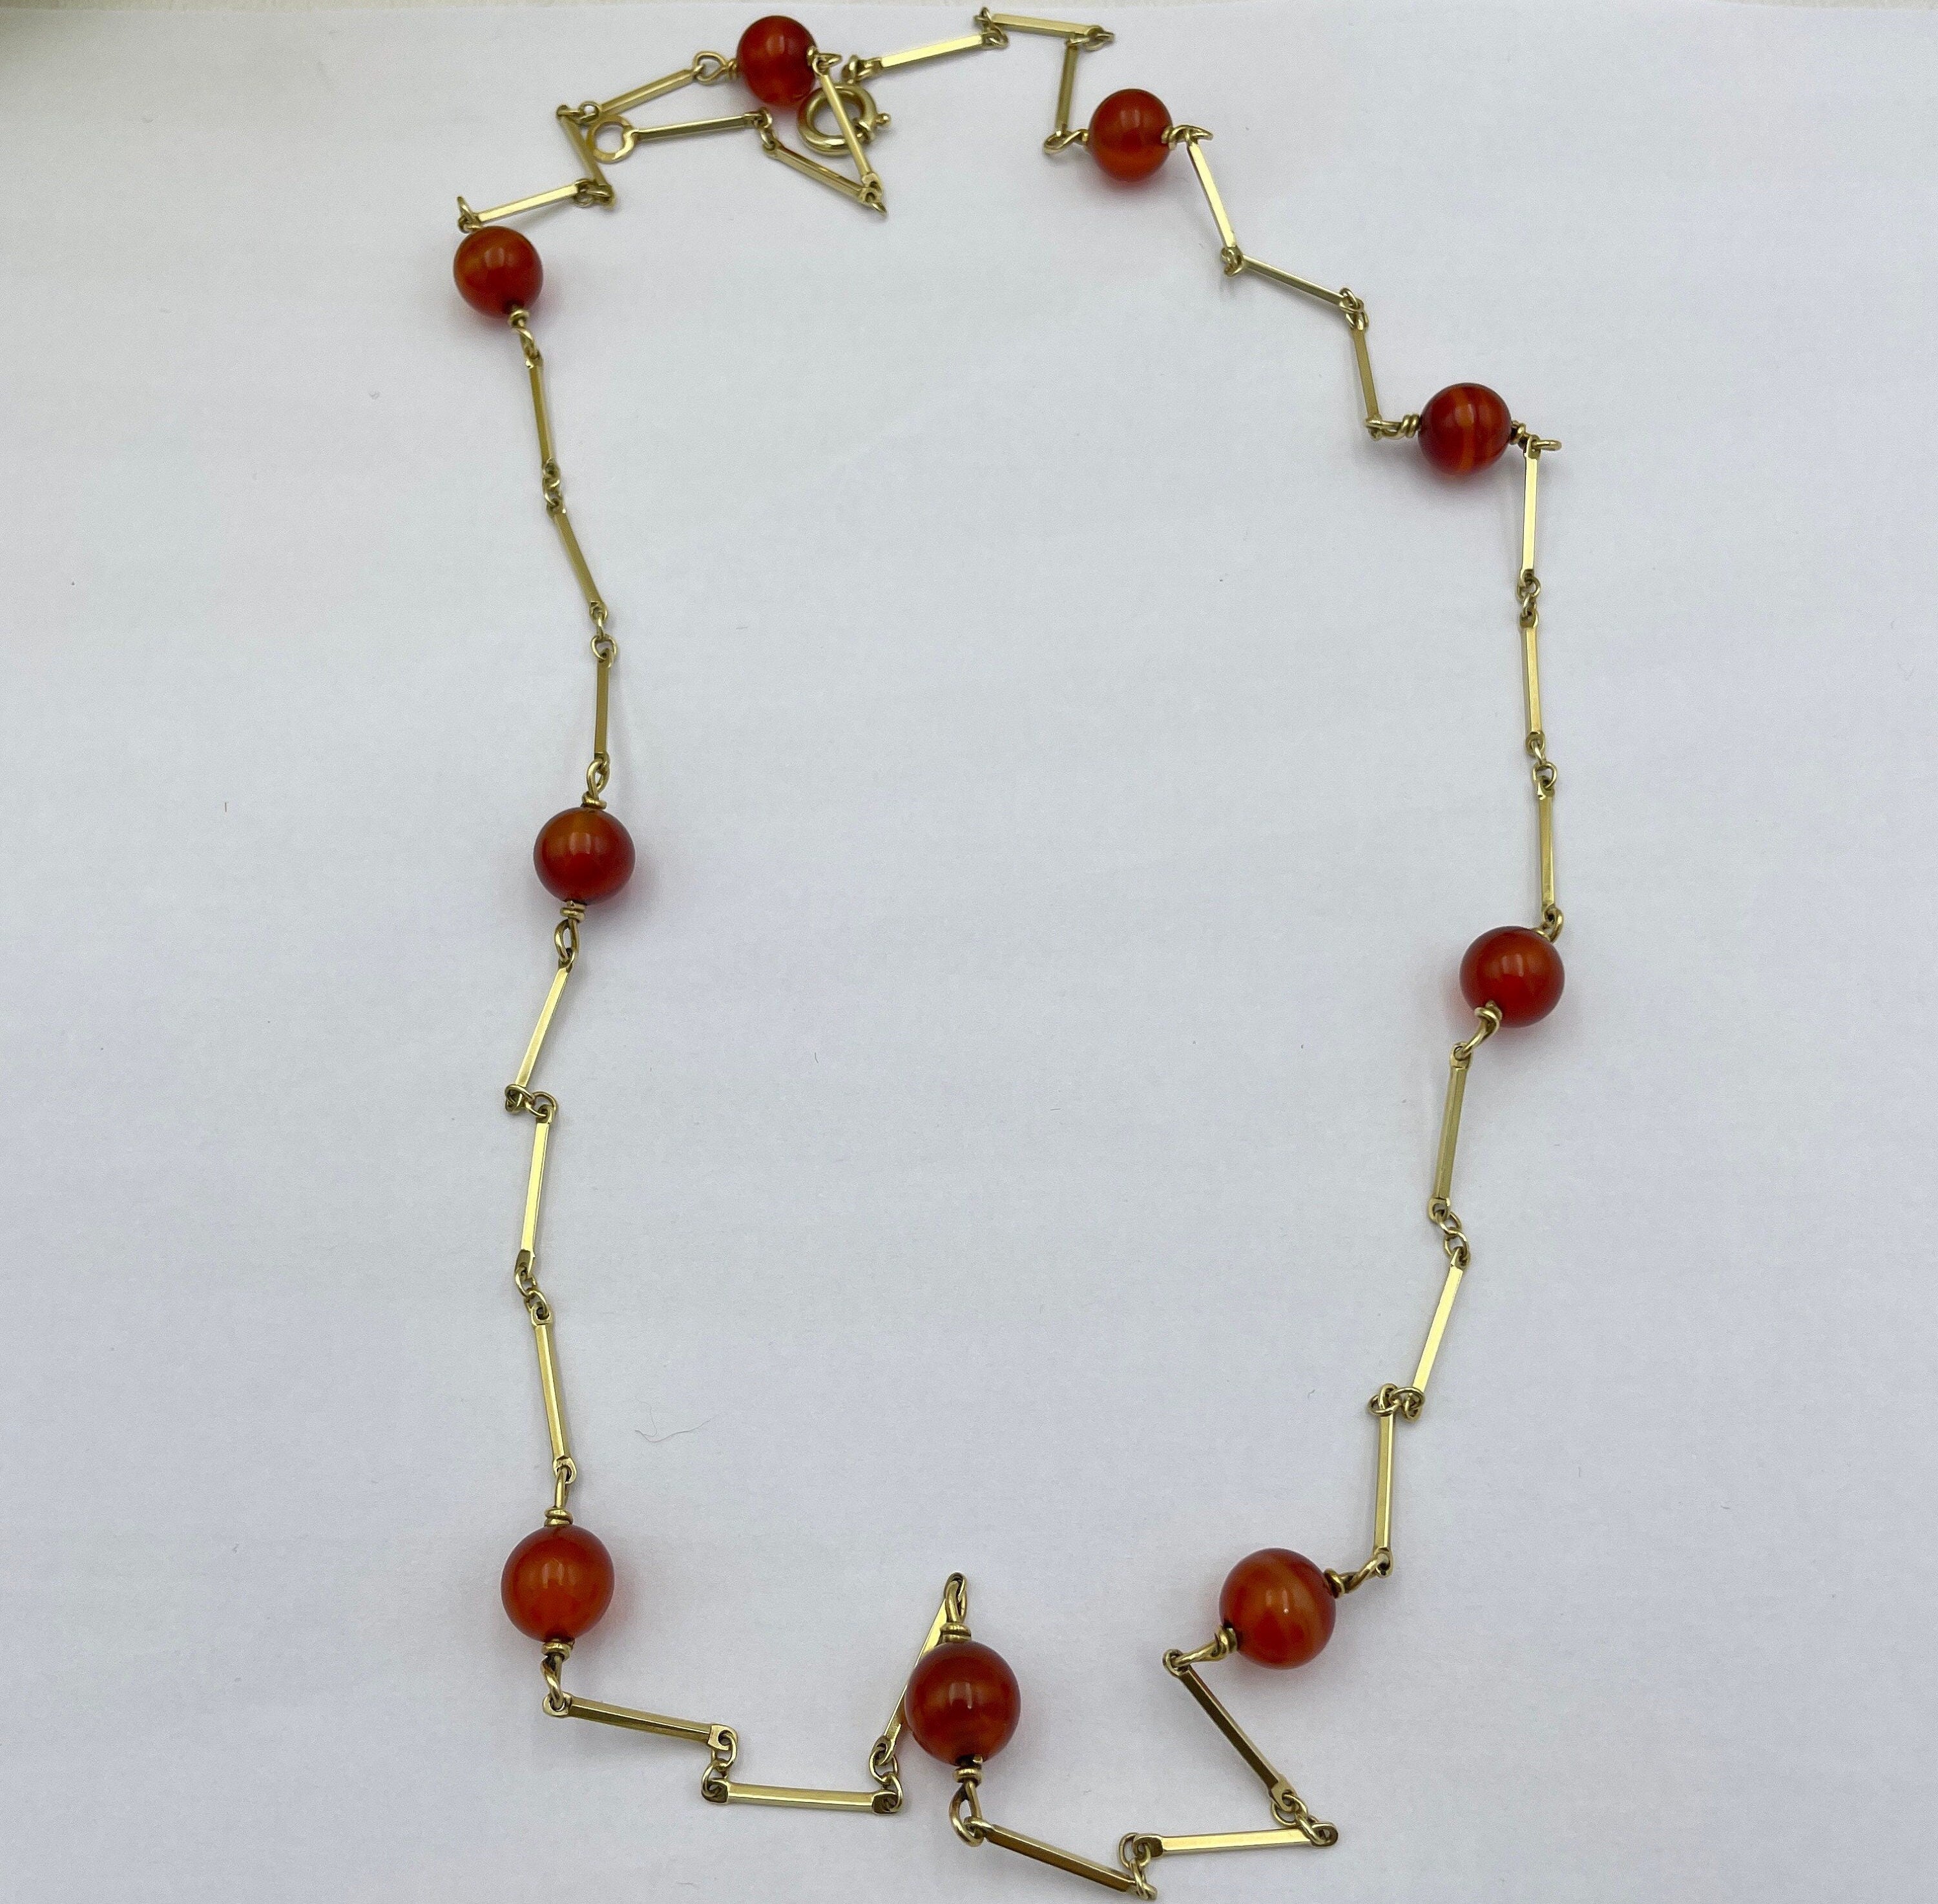 Vintage 14ct Gold and carnelian bead chain necklace